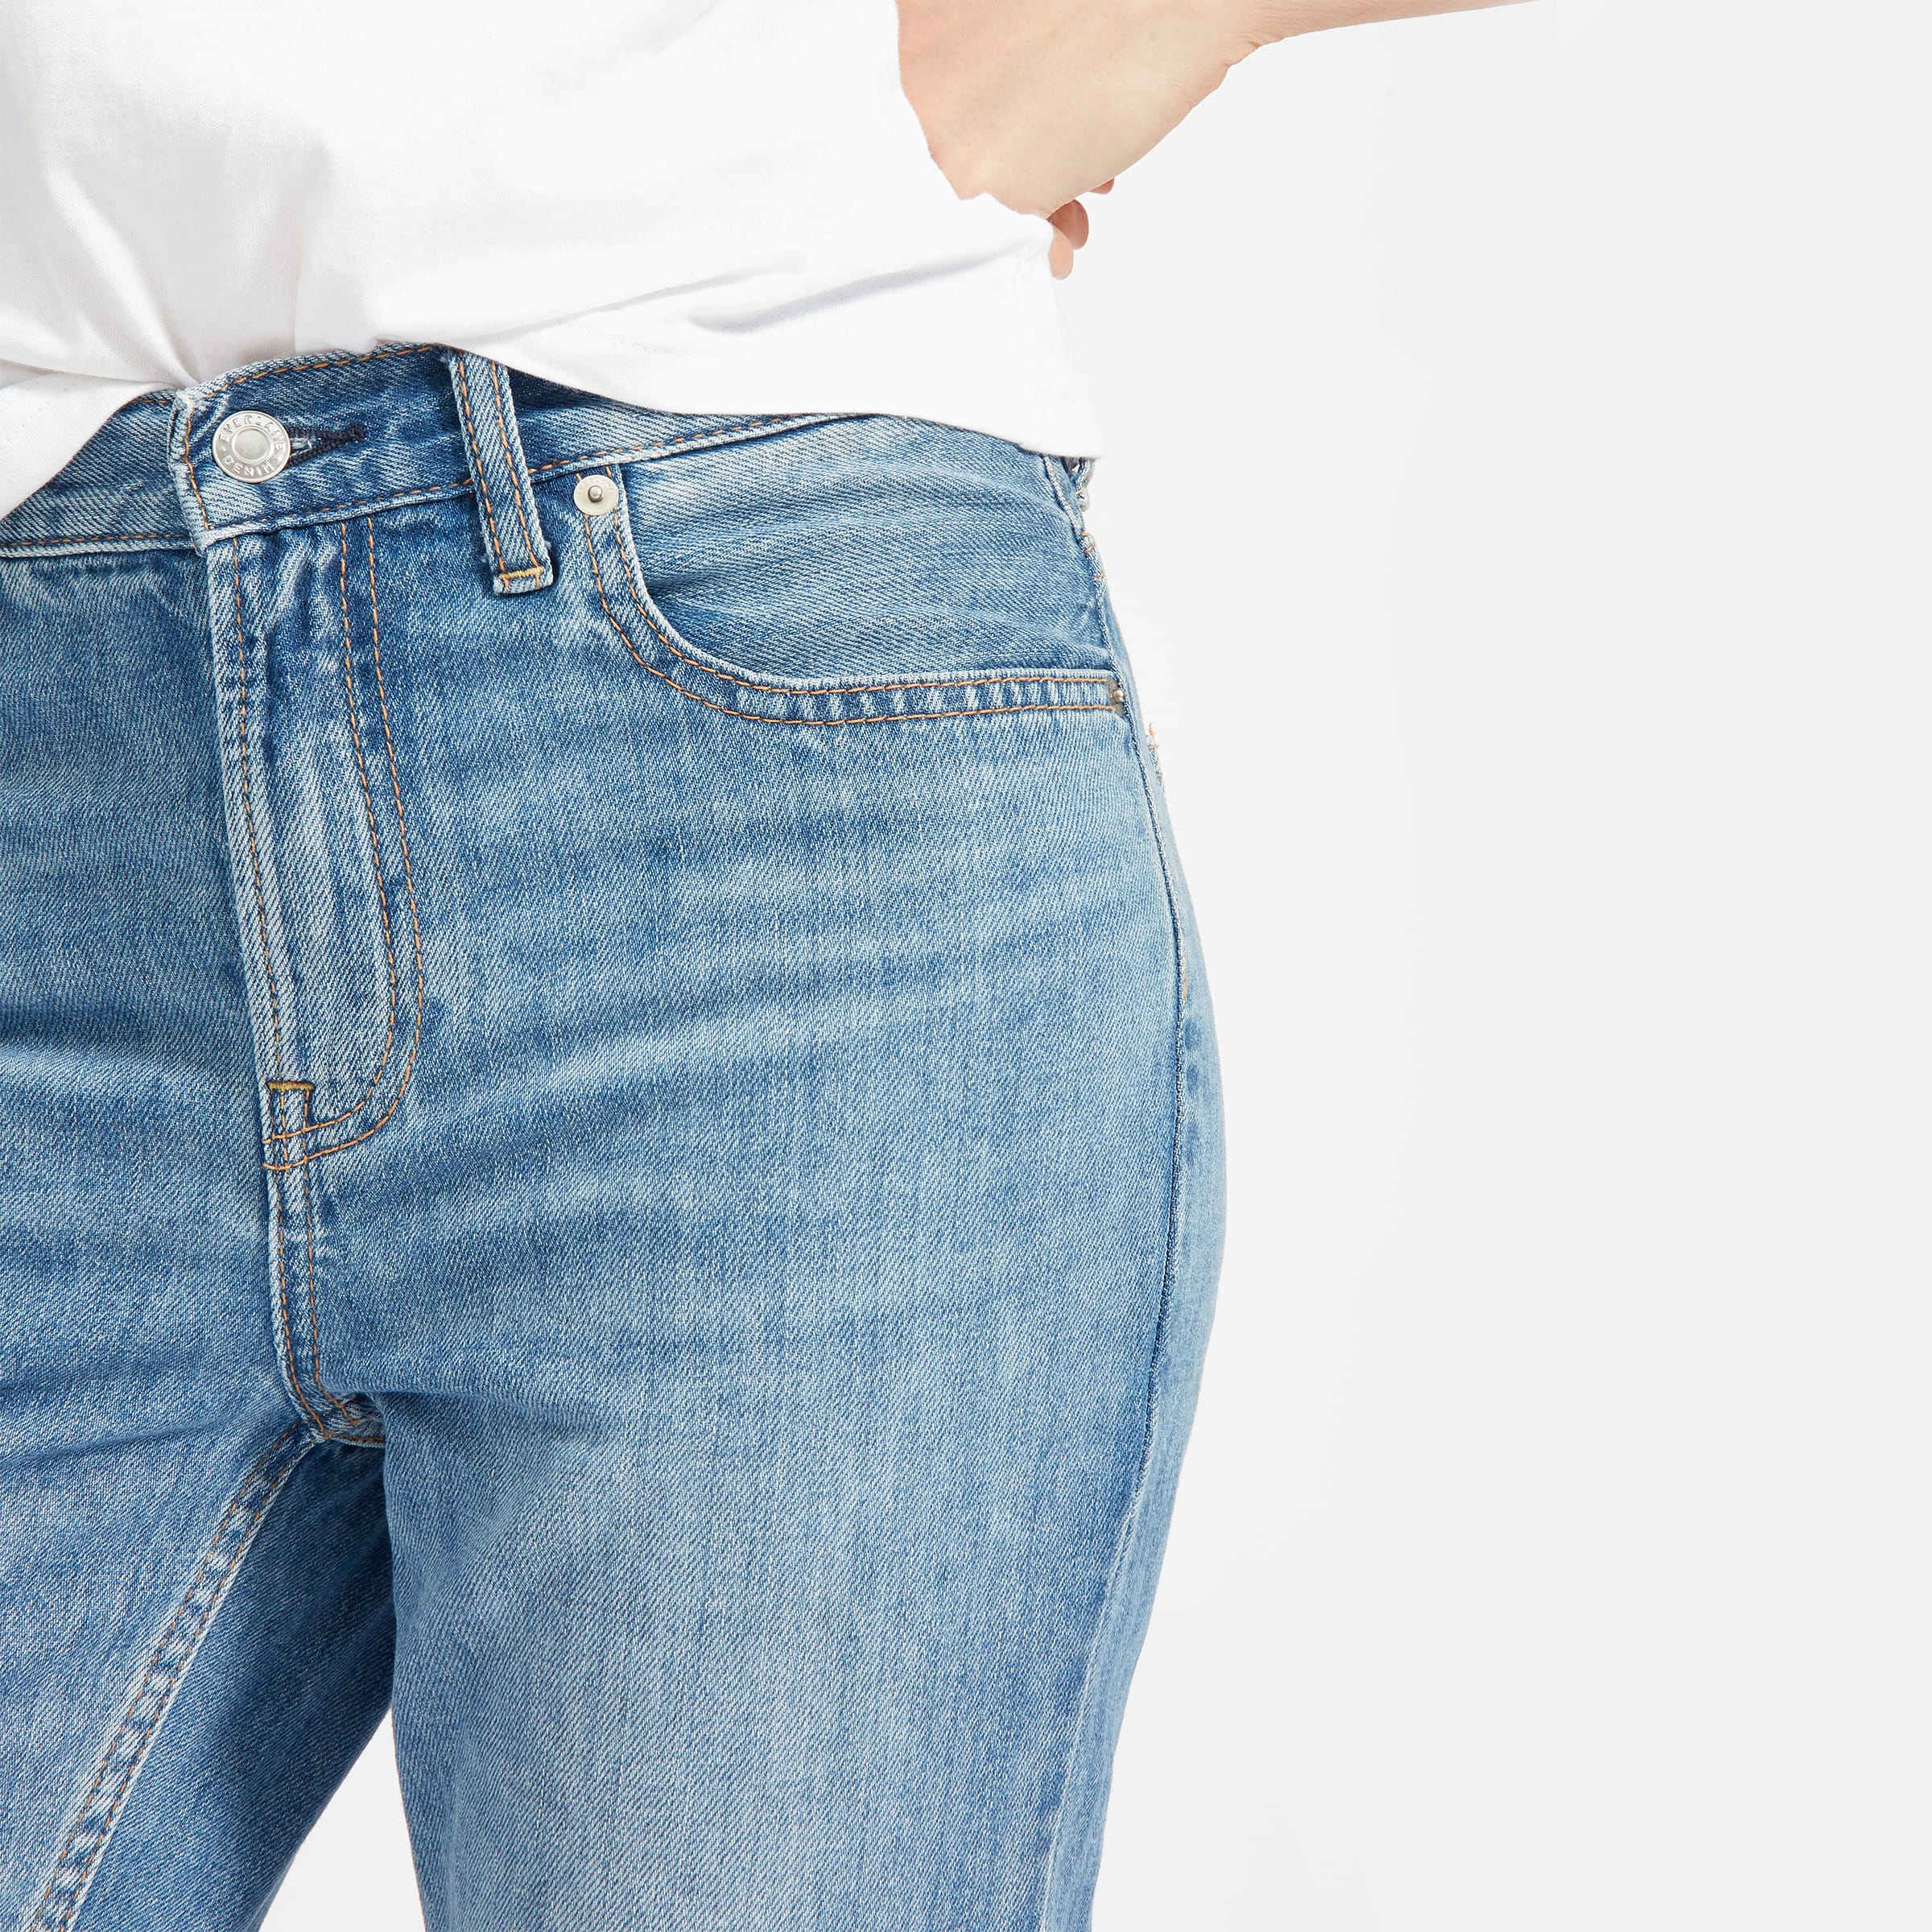 Women's Relaxed Fit Jeans – Everlane